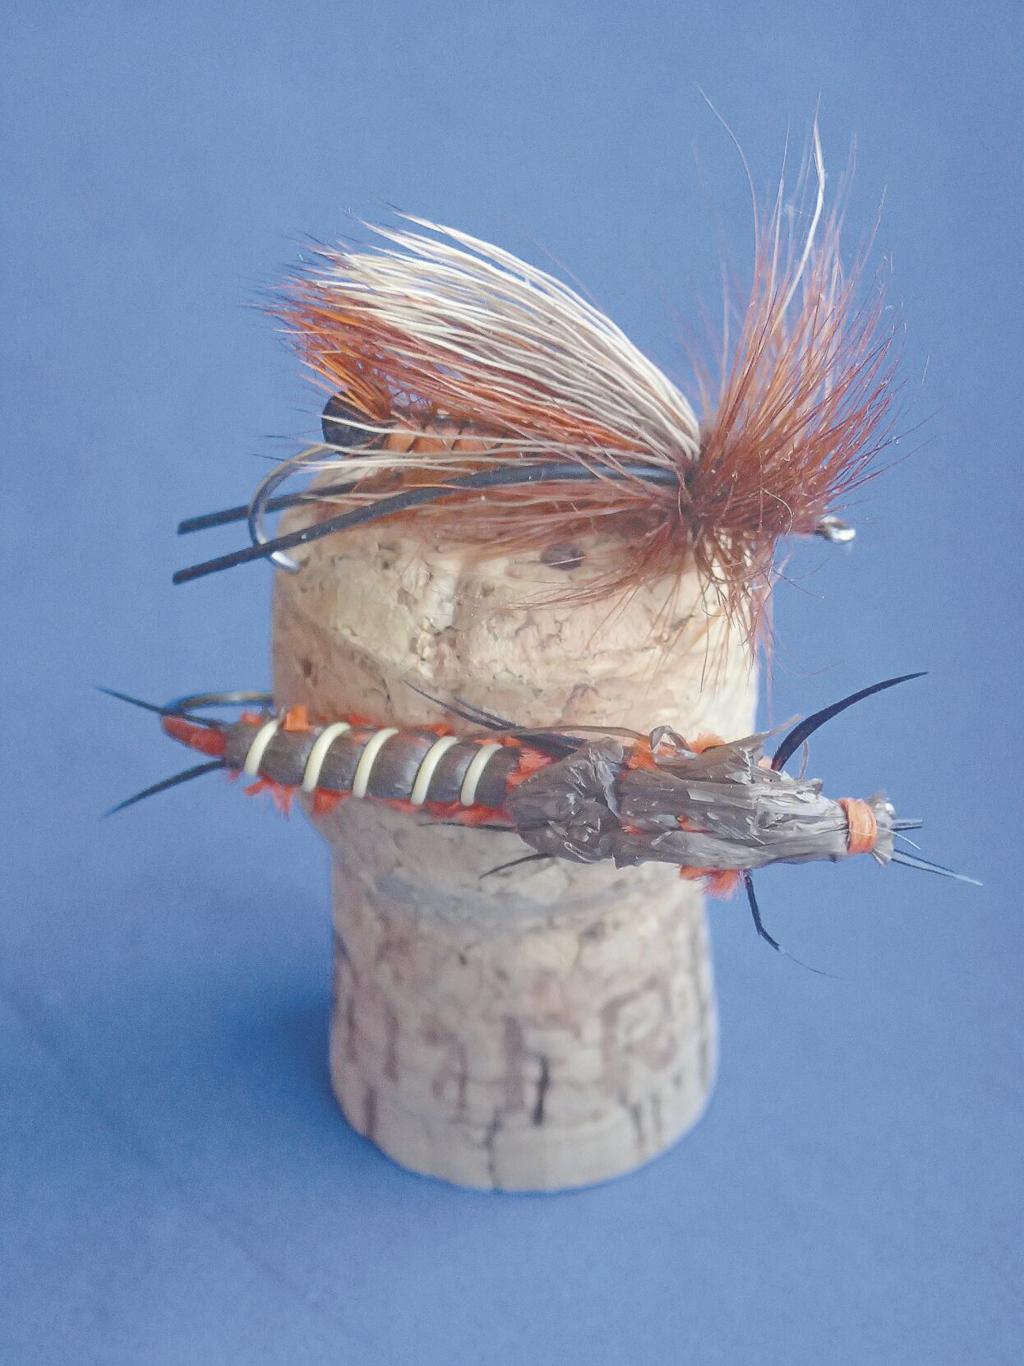 Build your own bug: Learning to tie flies makes anglers more